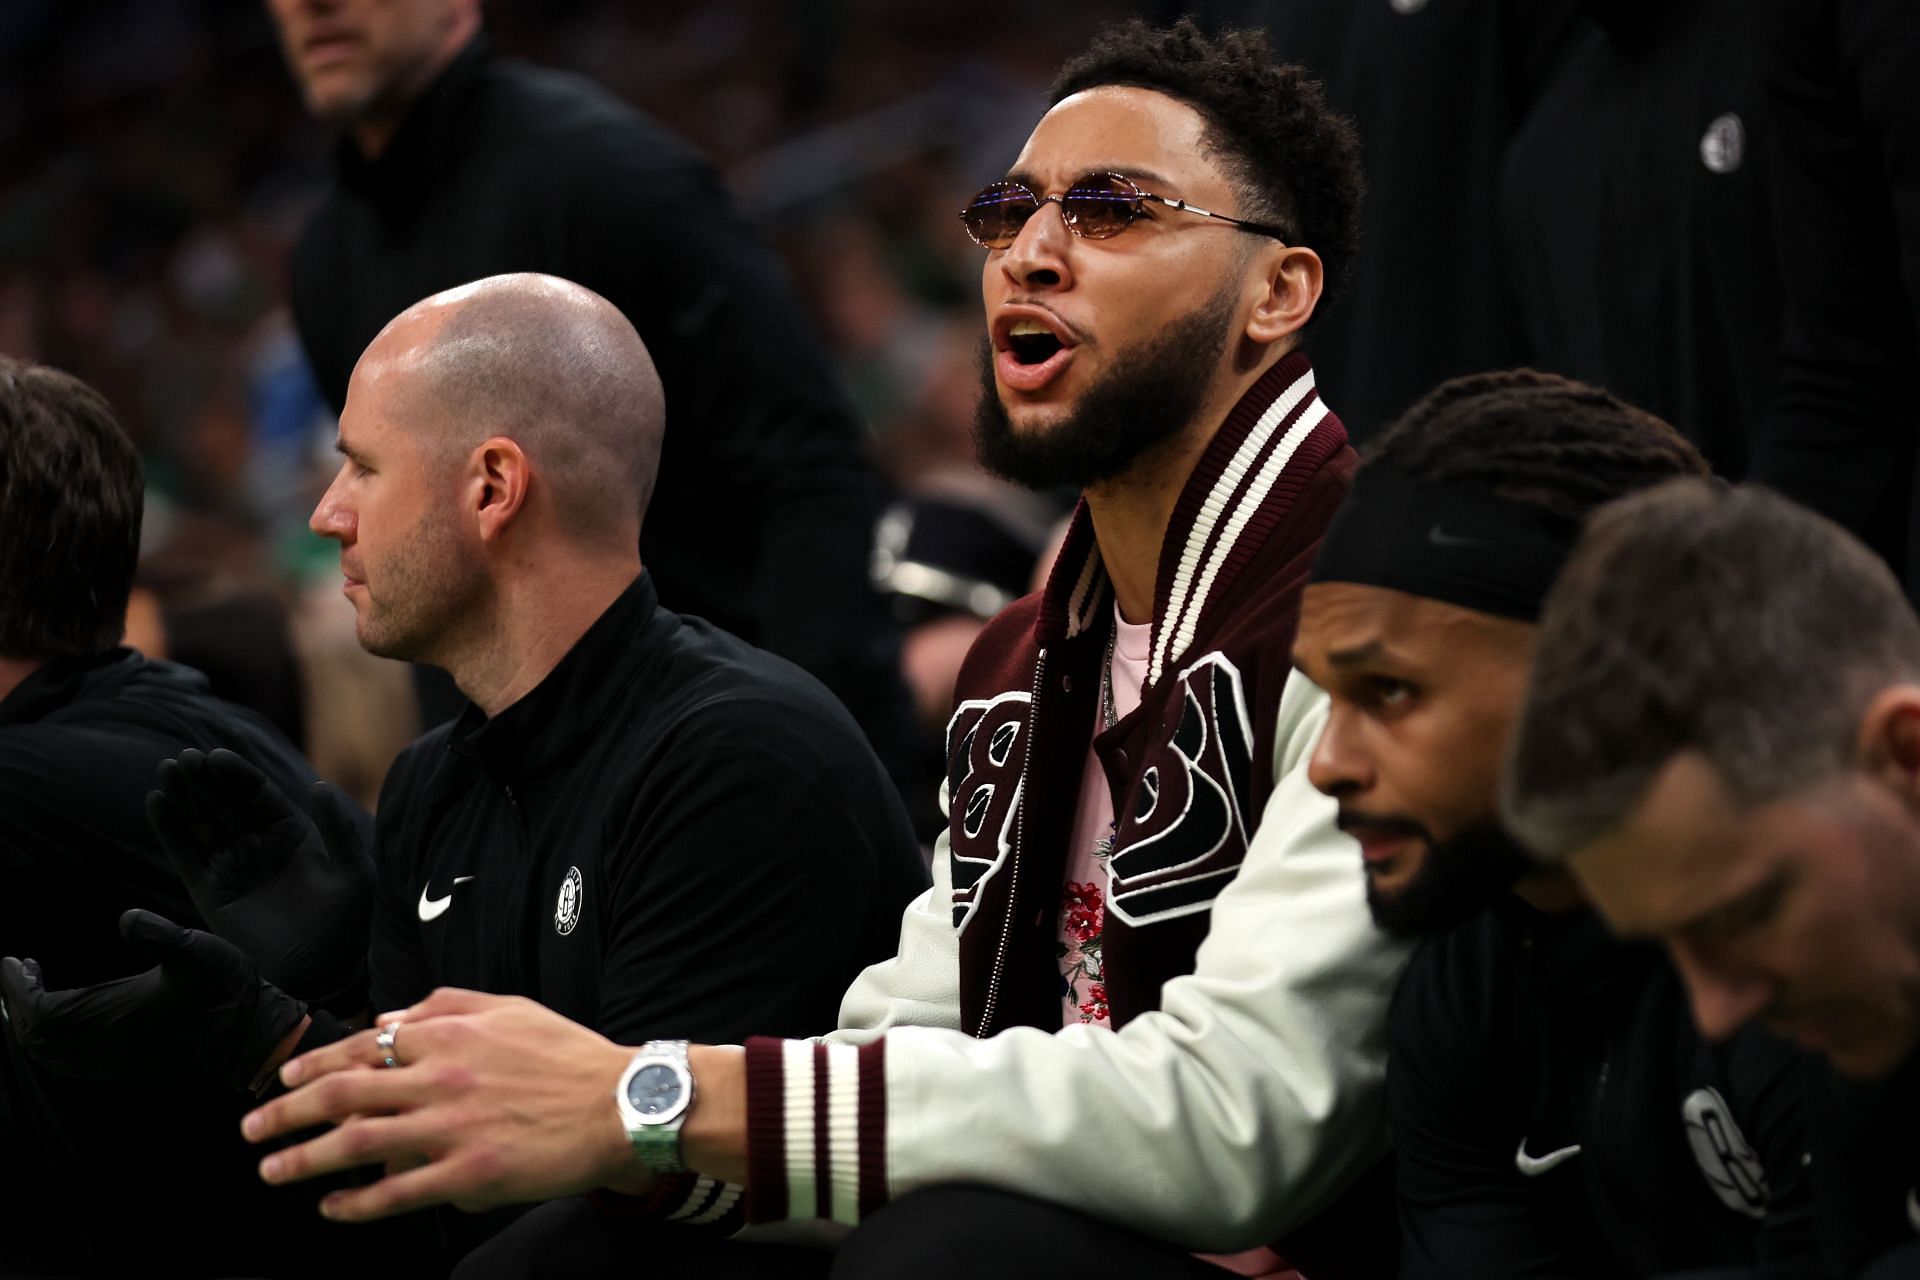 Ben Simmons #10 of the Brooklyn Nets sits on the bench during the first quarter of Round 1 Game 1 of the 2022 NBA Eastern Conference Playoffs against the Boston Celtics at TD Garden on April 17, 2022 in Boston, Massachusetts